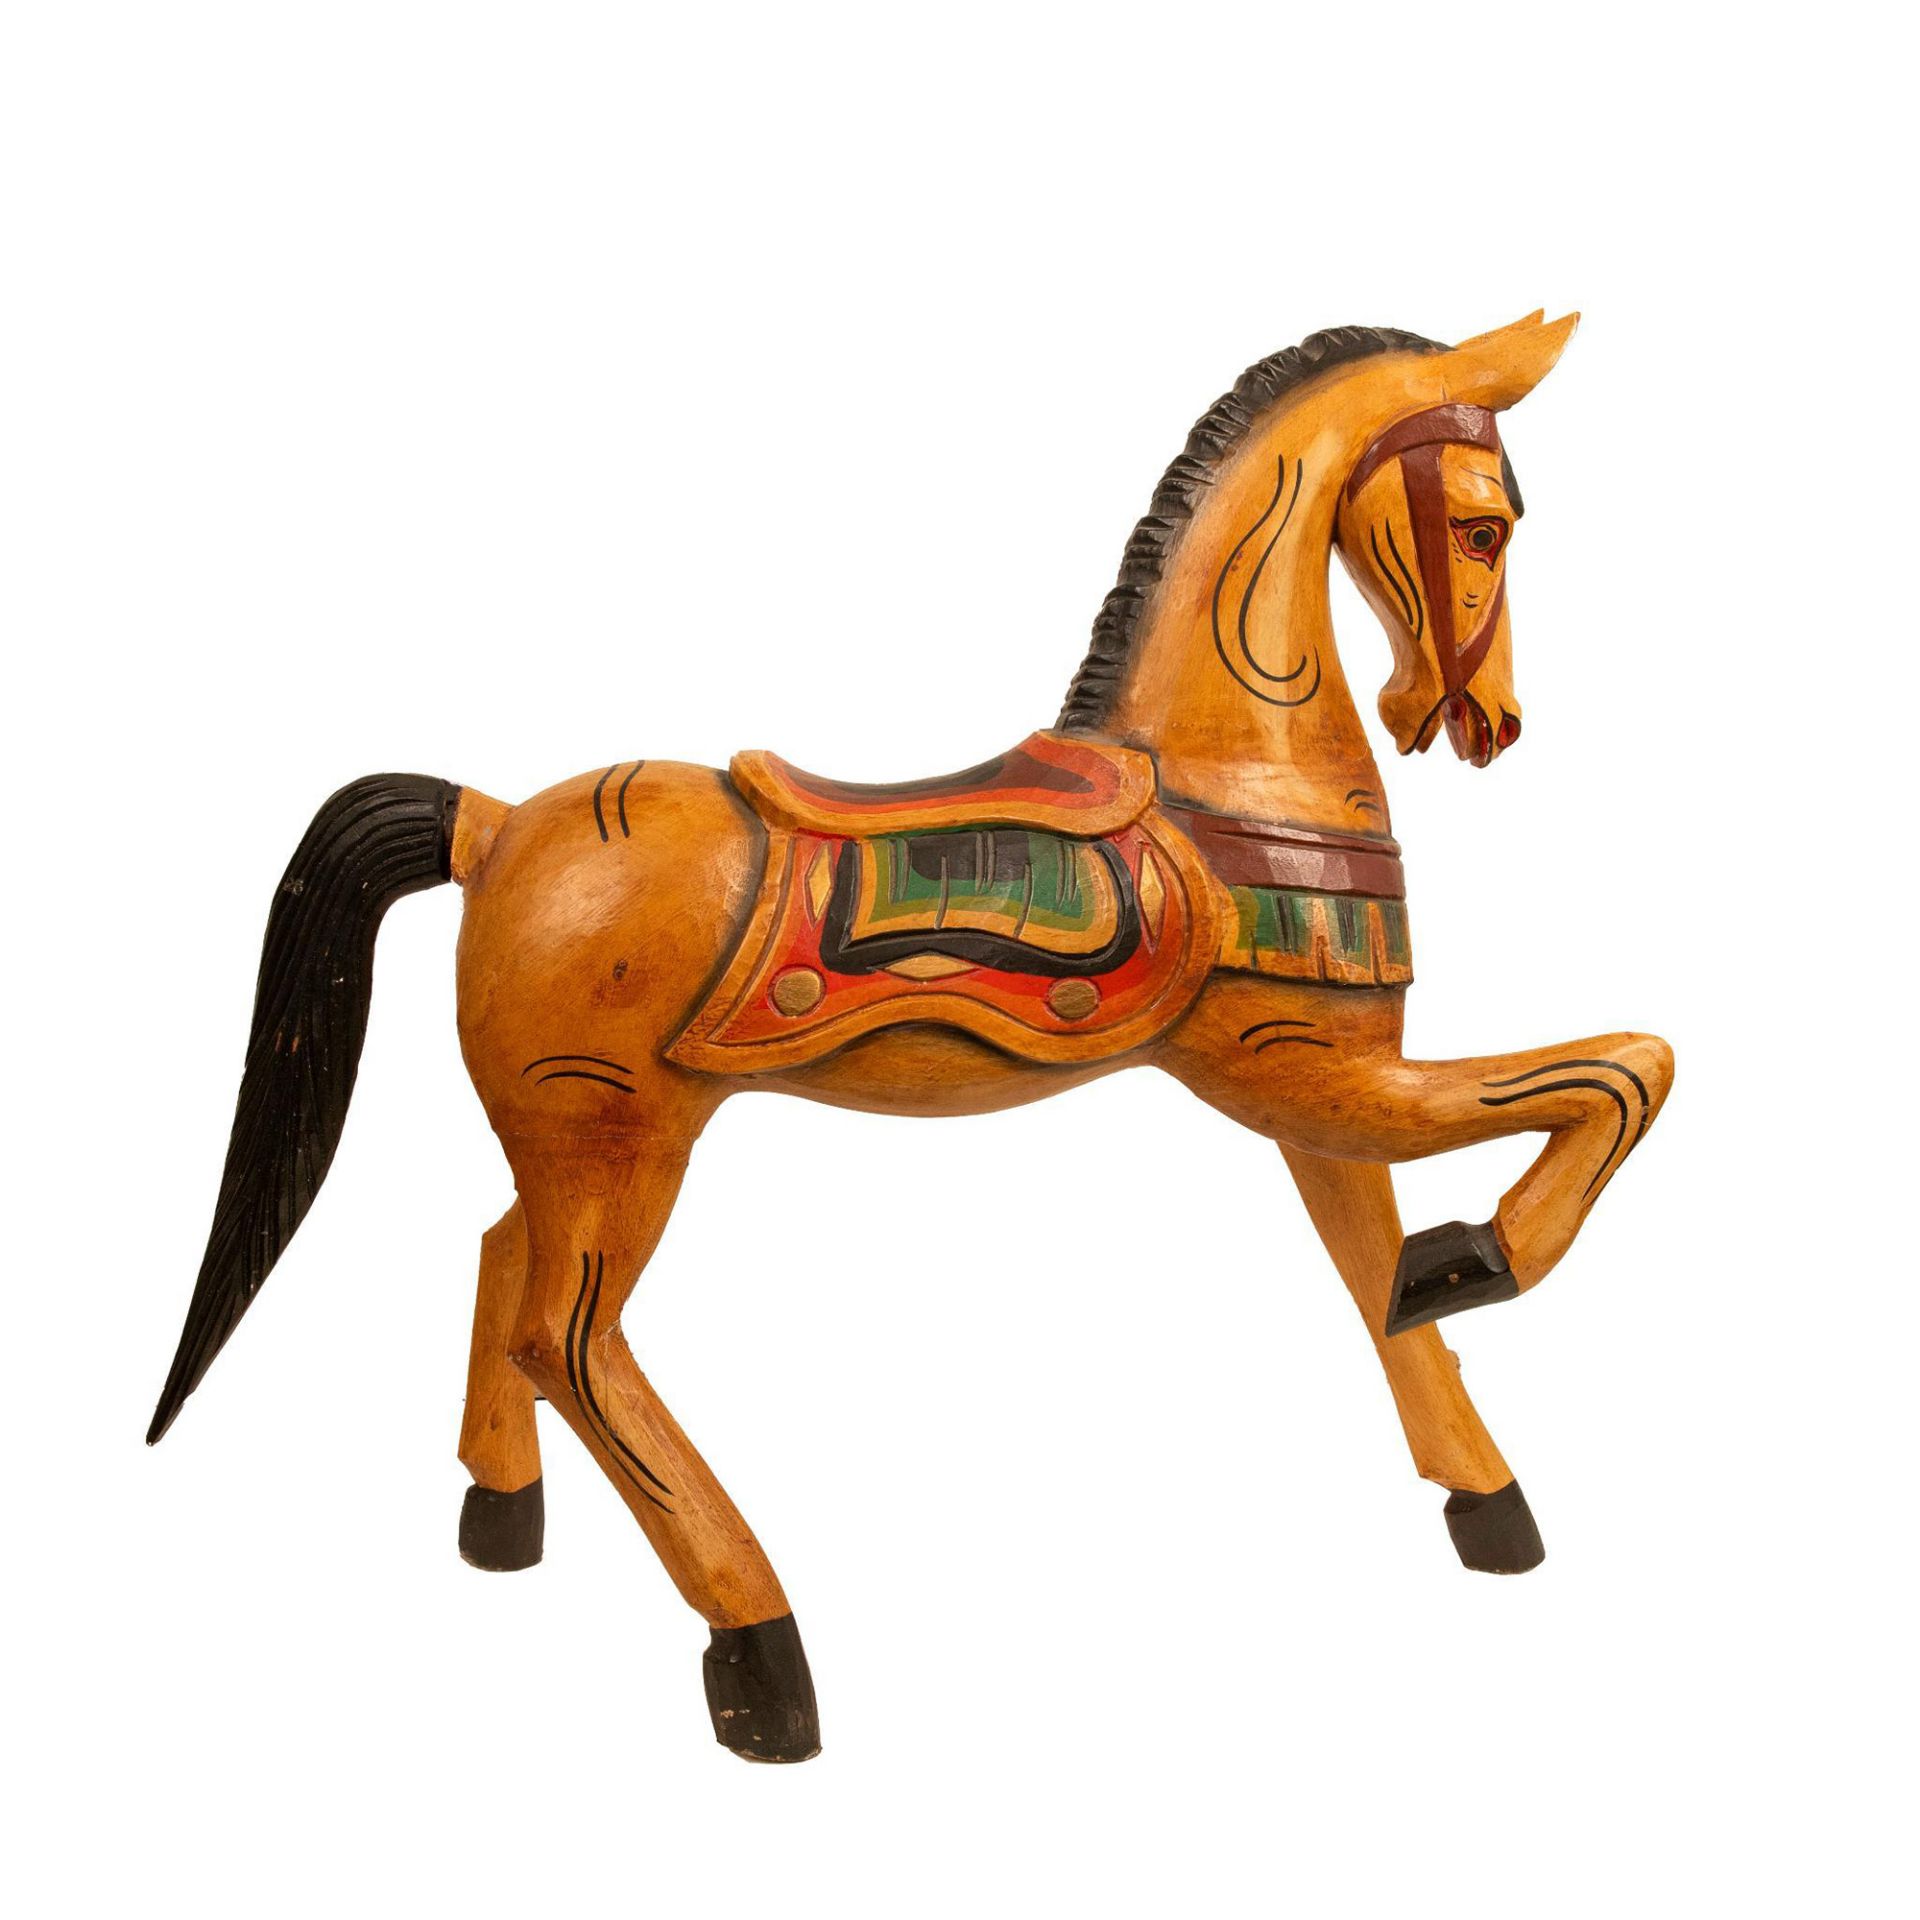 Vintage Wooden Carousel Style Horse Statue - Image 3 of 5